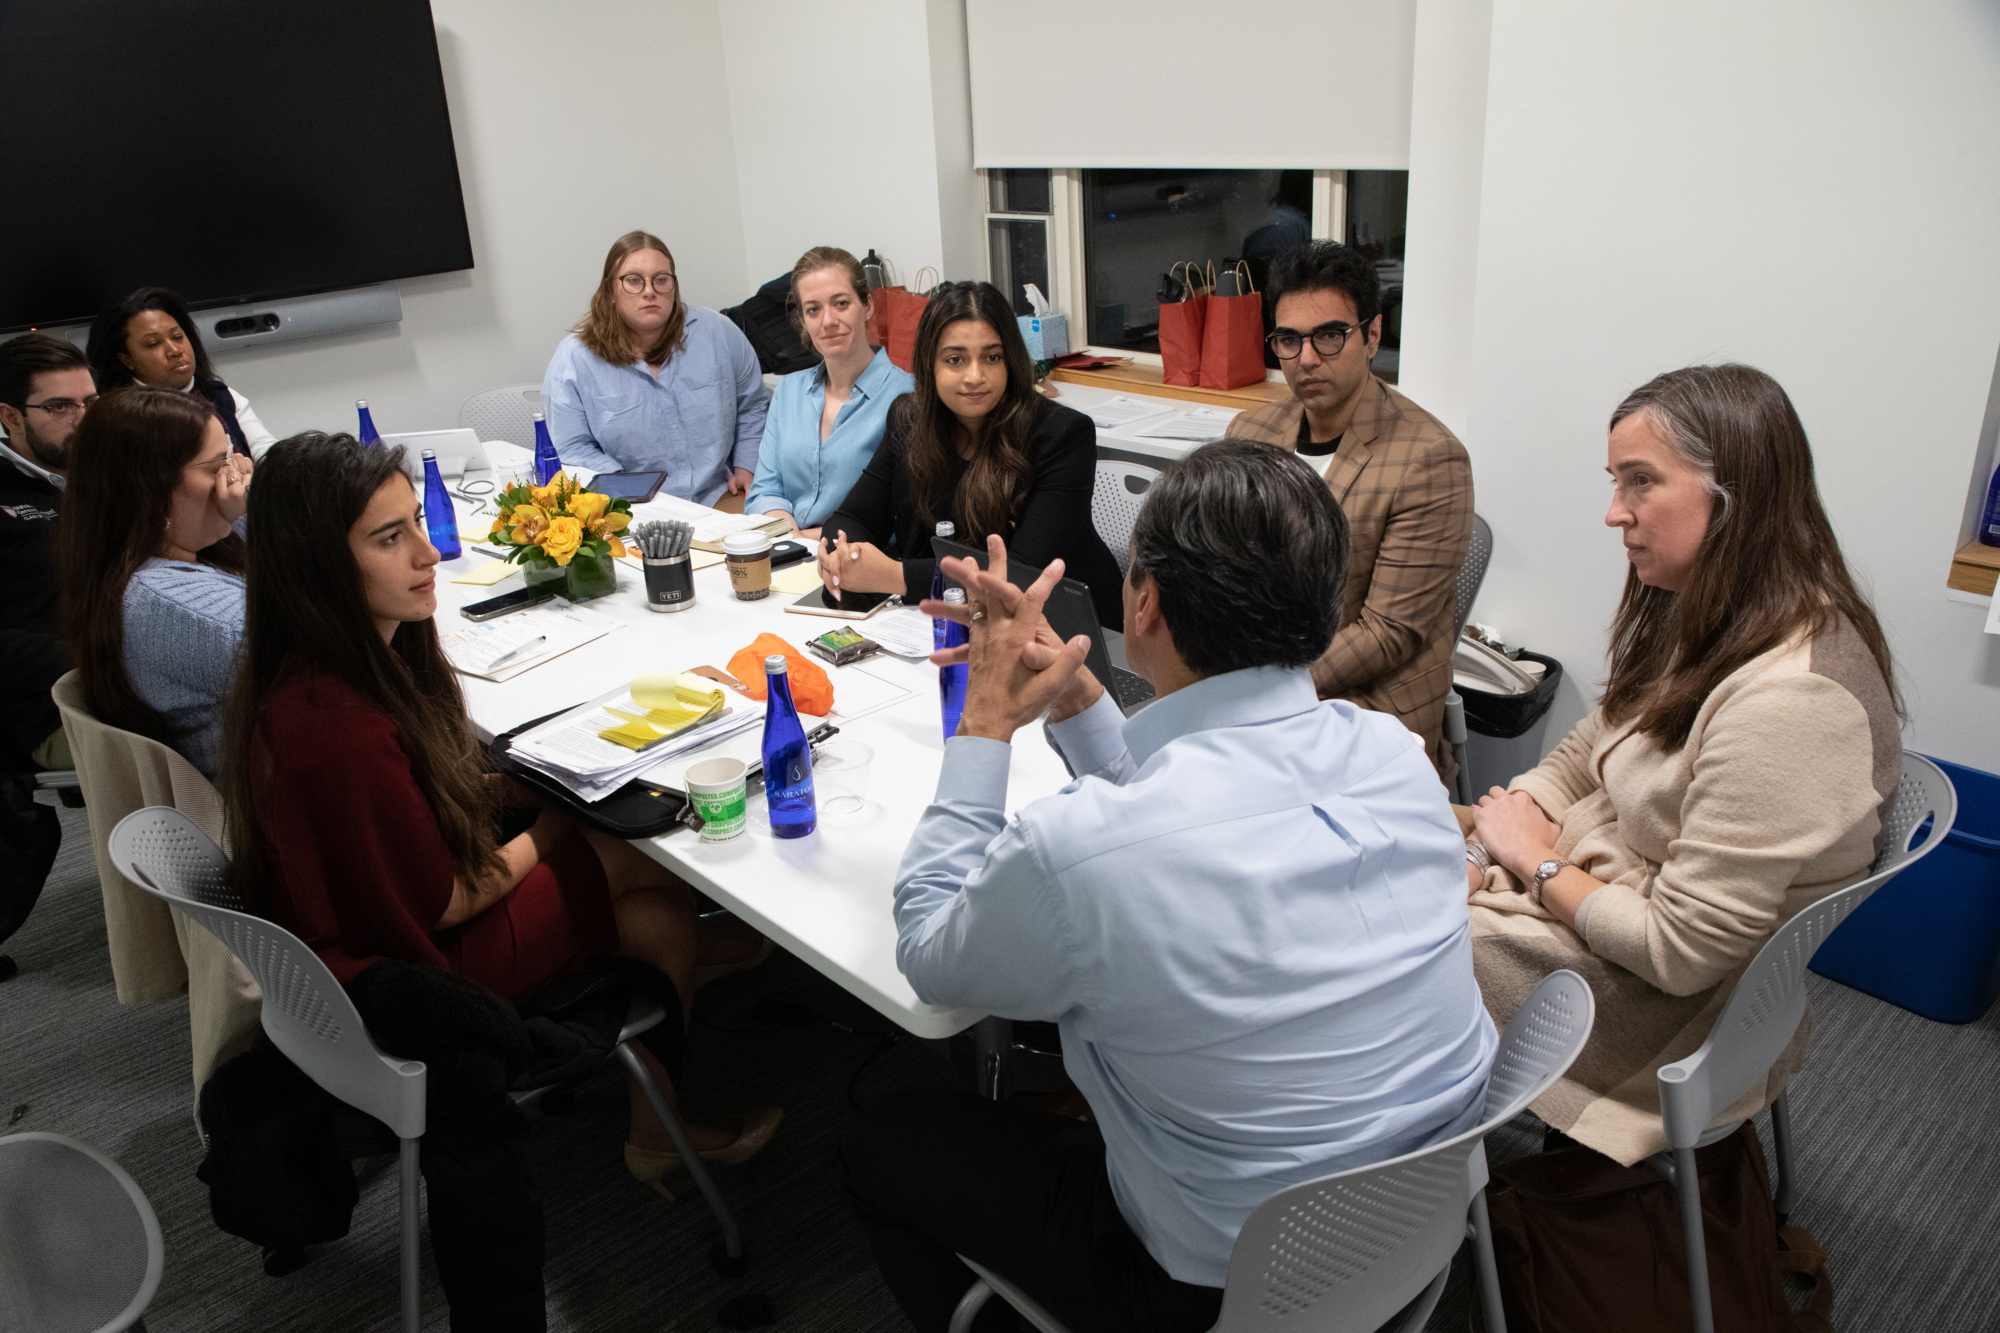 Harvard Fellows at a table in discussion